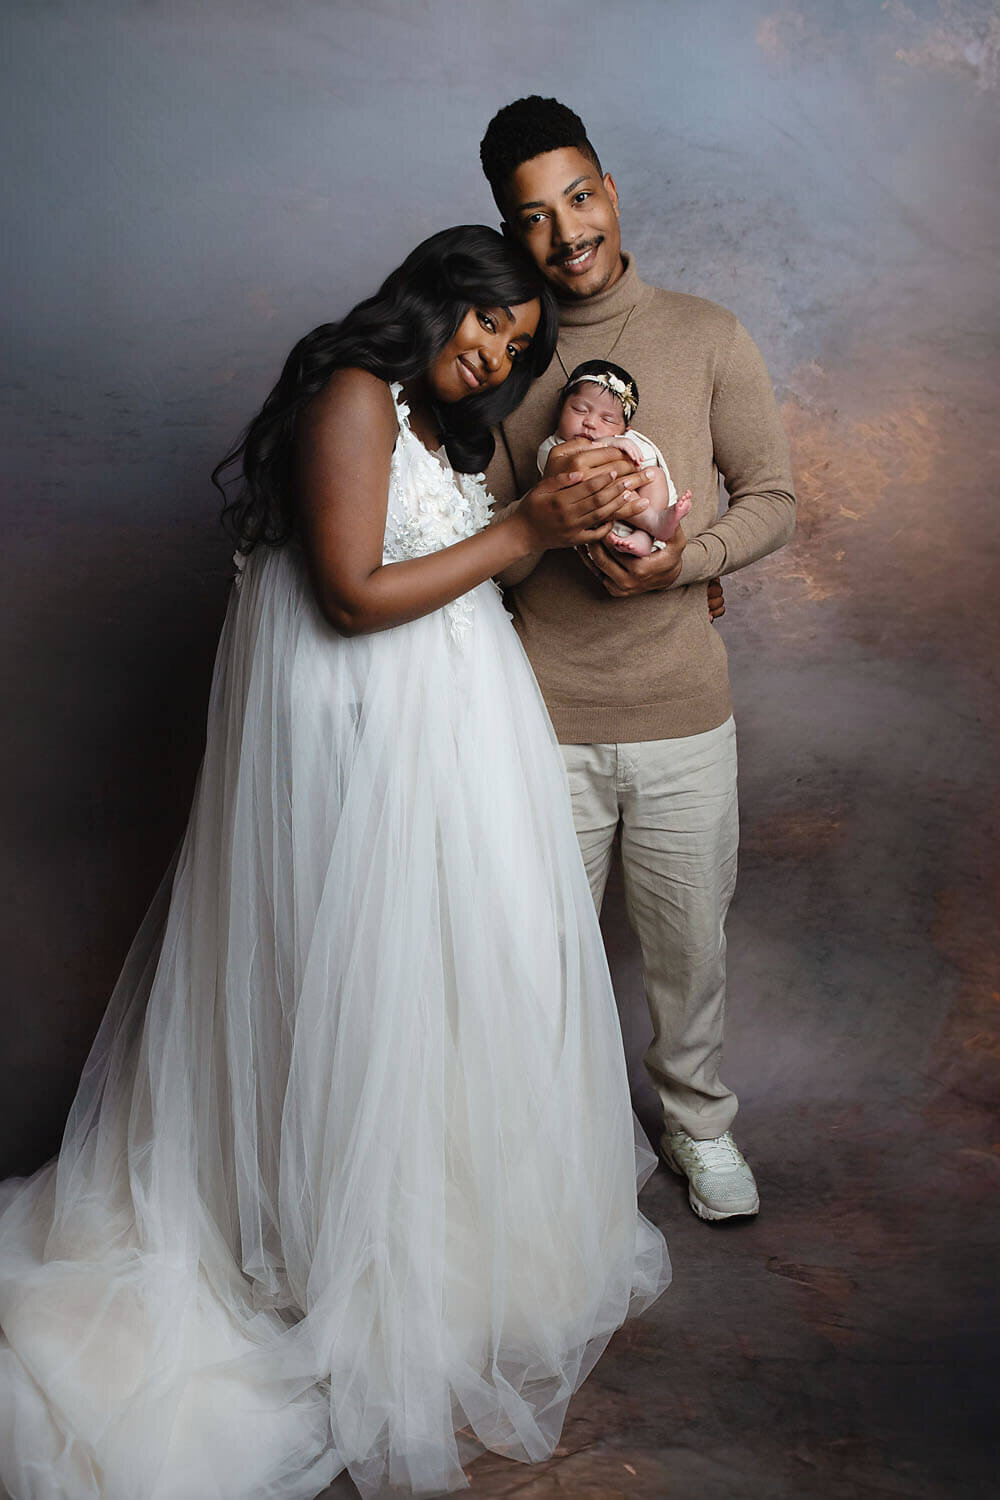 Happy parents stand in a studio smiling while dad cradles their sleeping newborn baby